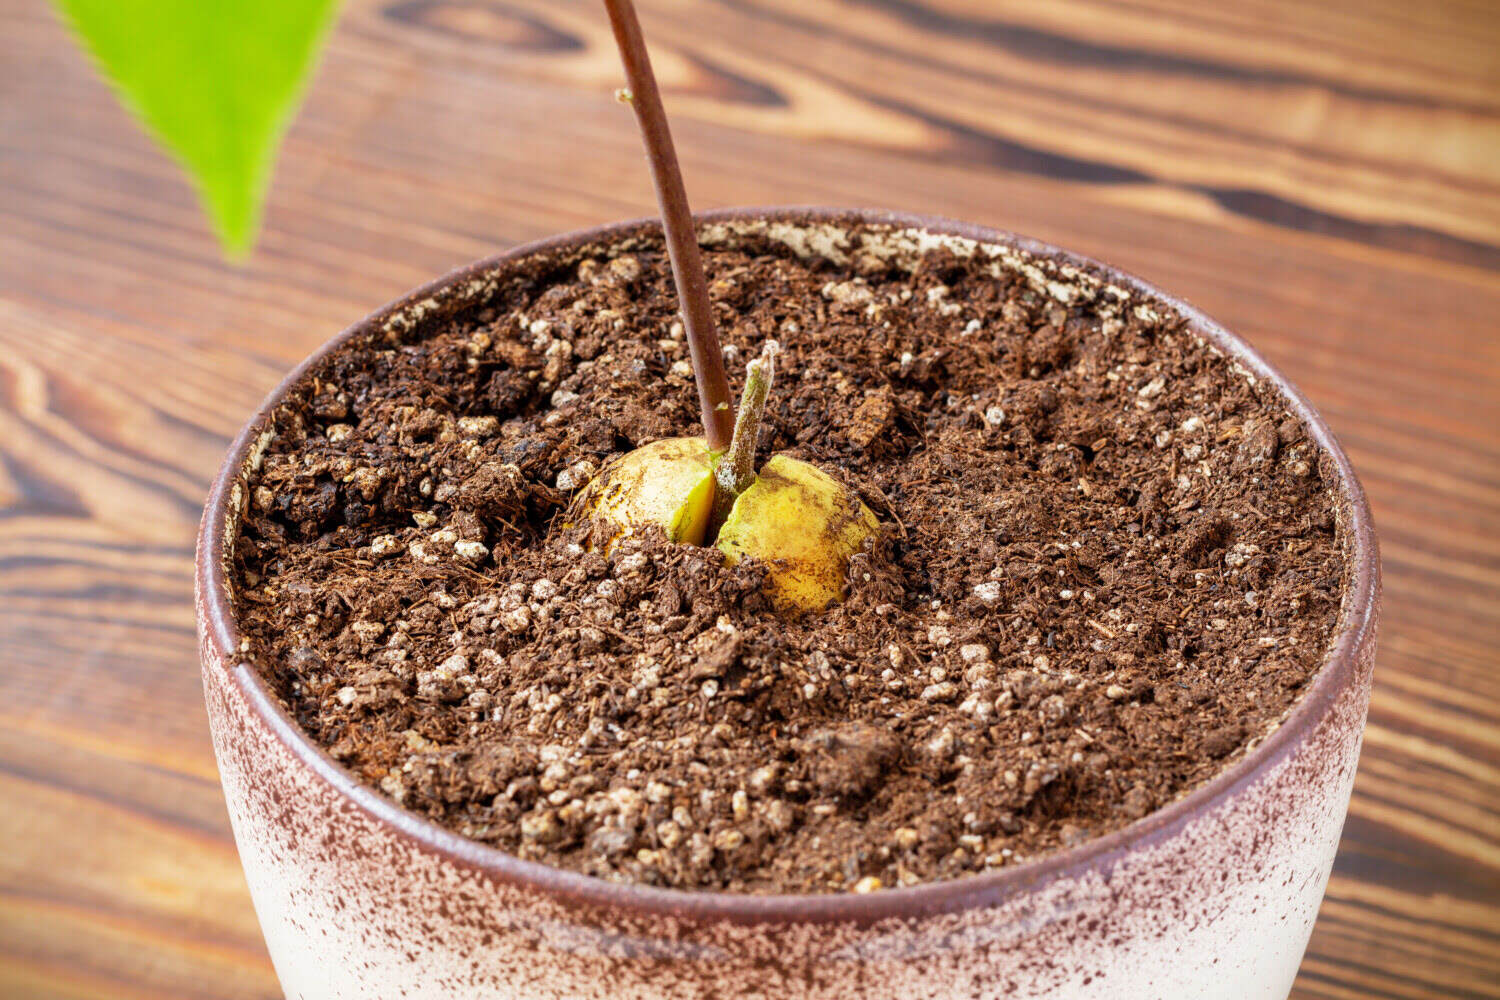 When To Plant Avocado Seed In Soil